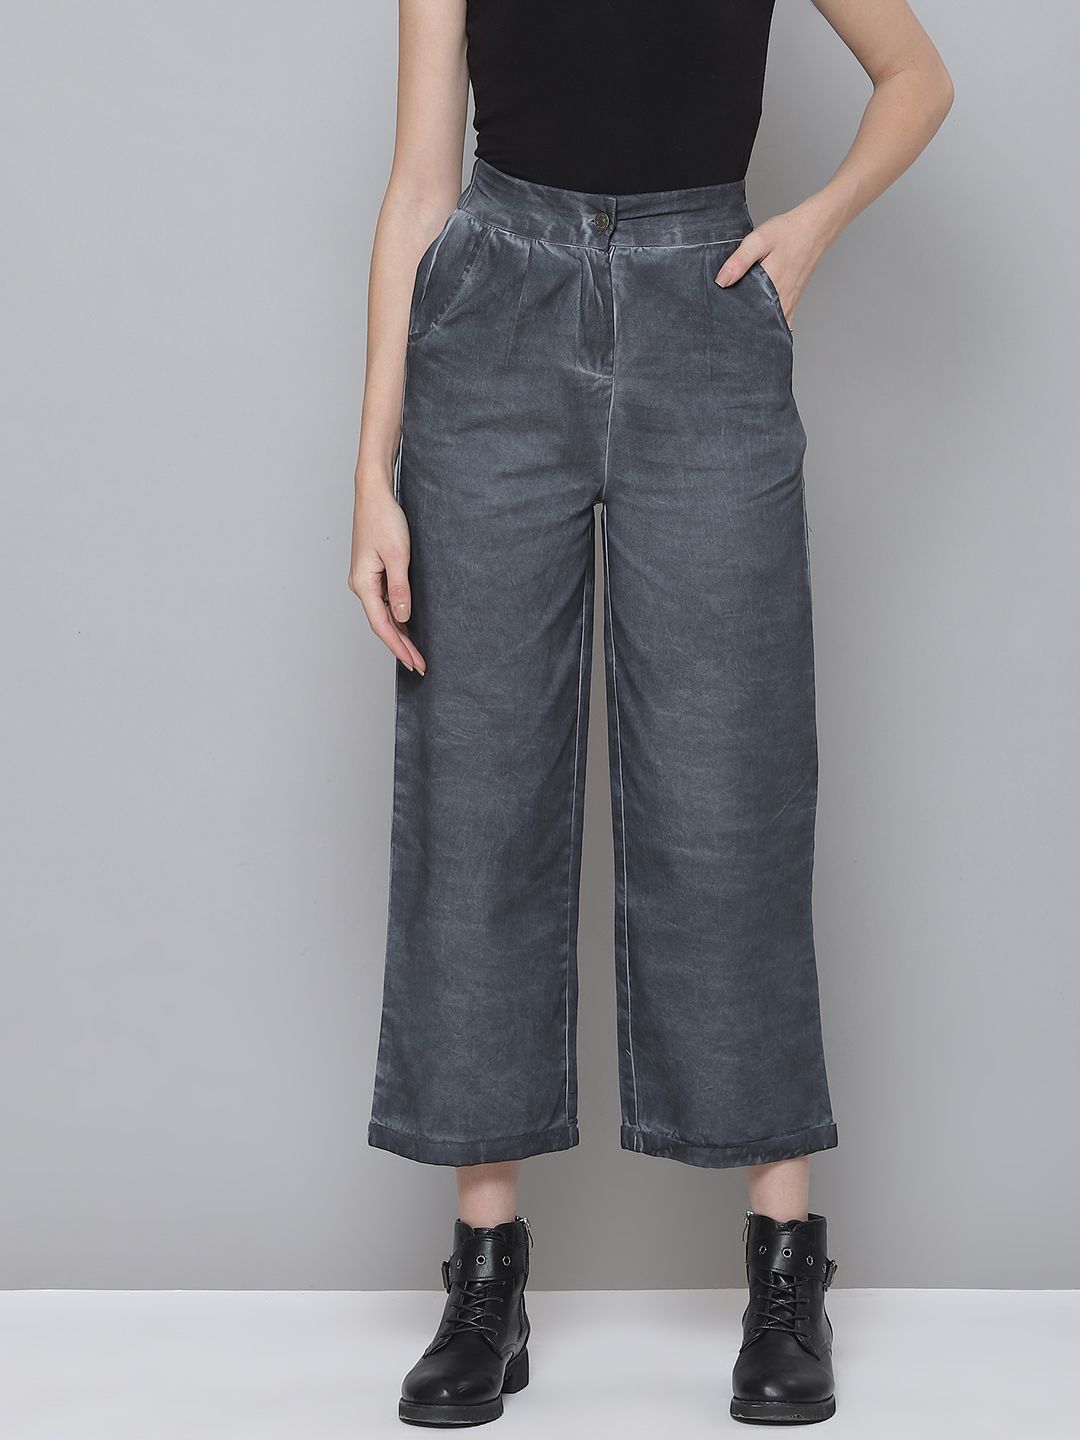 SASSAFRAS Women Grey Twill Cotton Faded Culottes Trousers Price in India